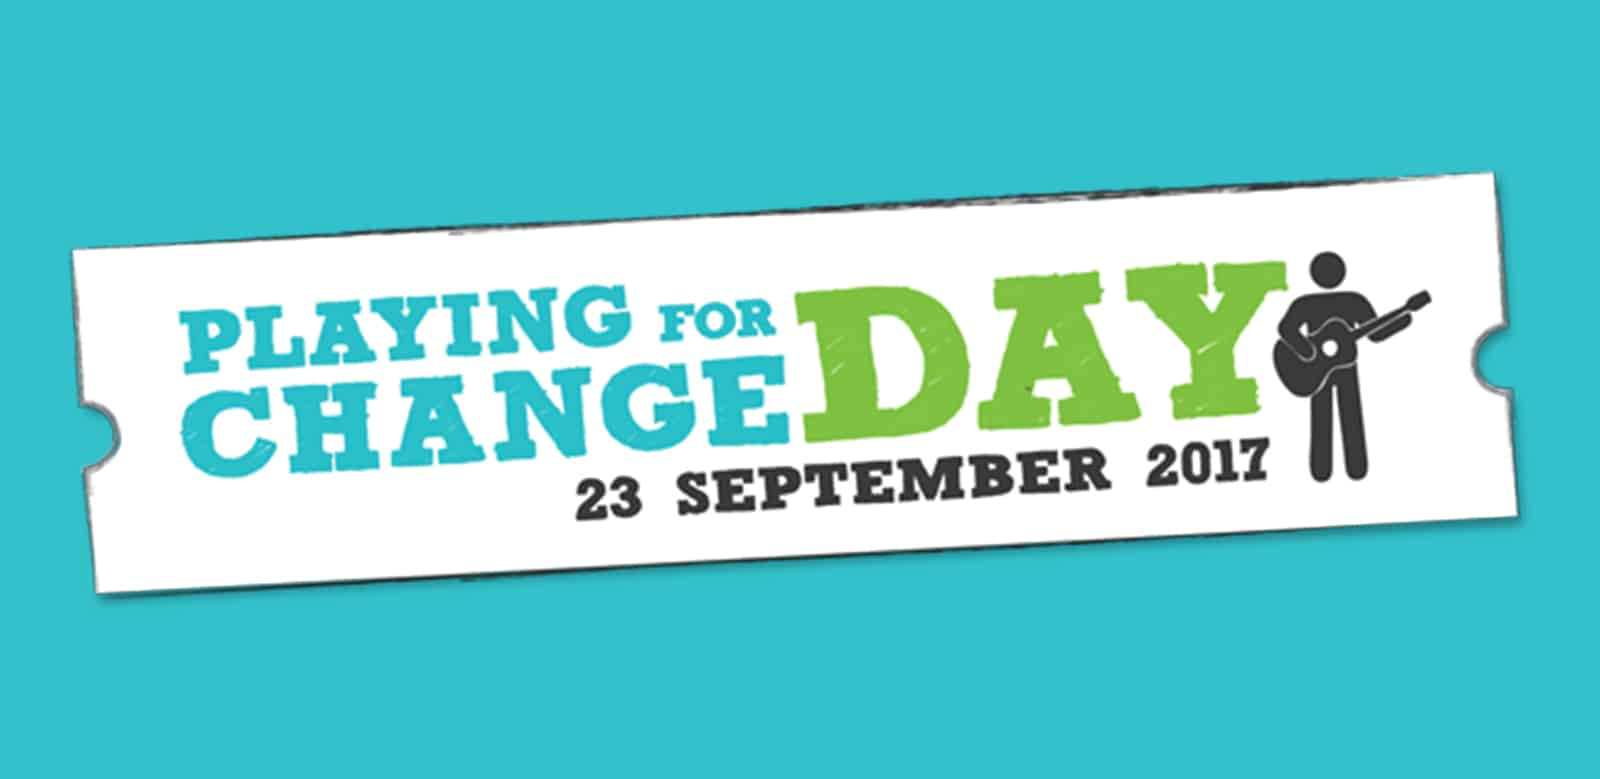 Playing For Change Day